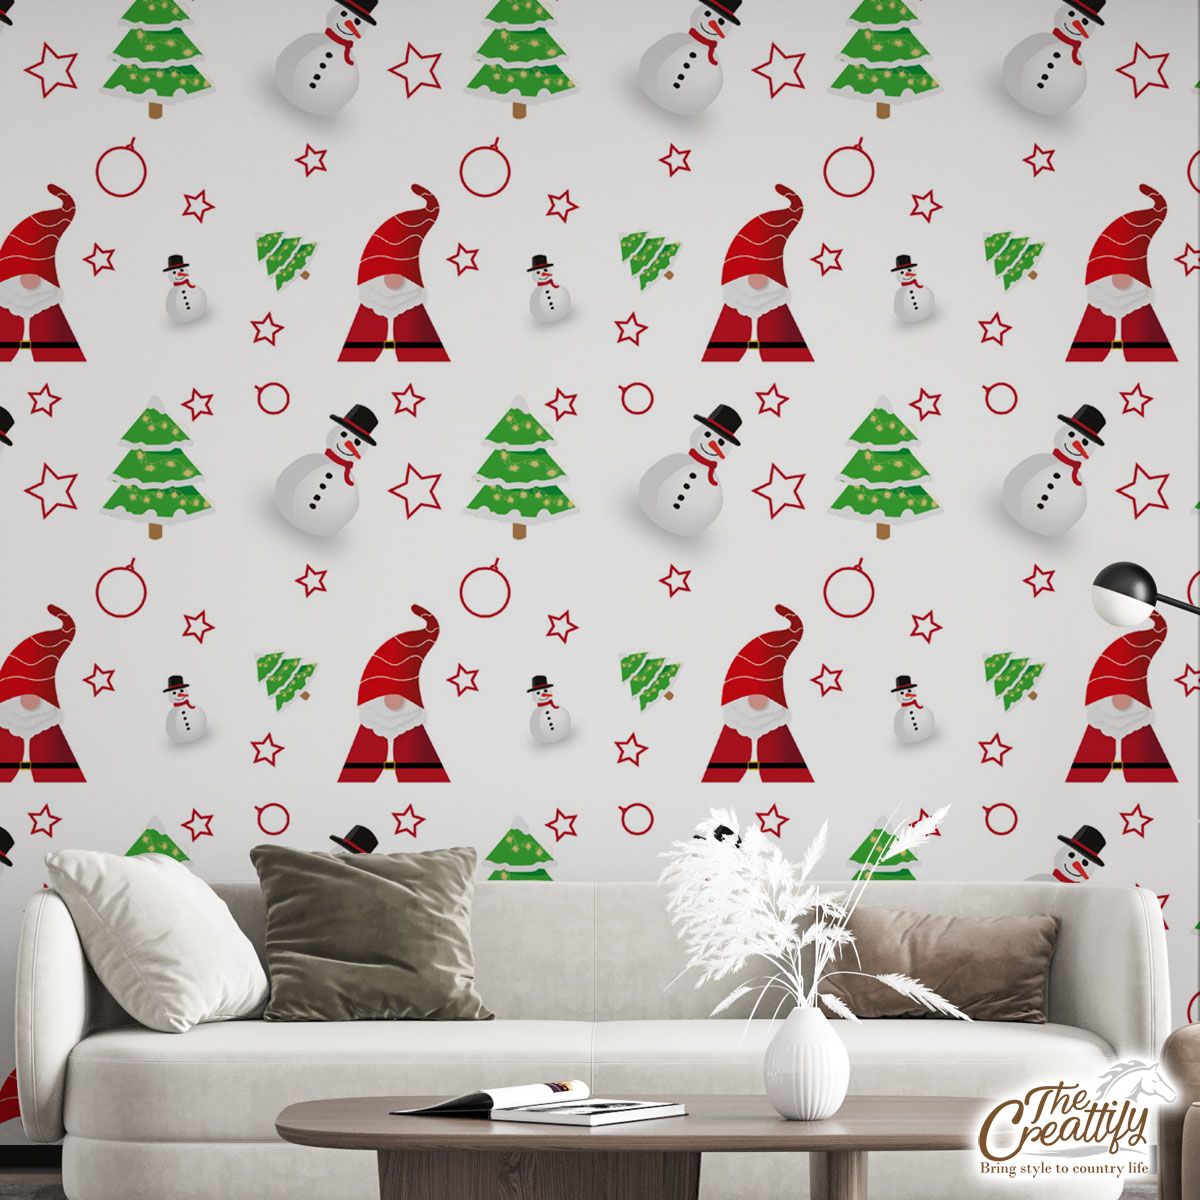 Santa Claus, Snowman Clipart And Pine Tree Silhouette Seamless Pattern Wall Mural